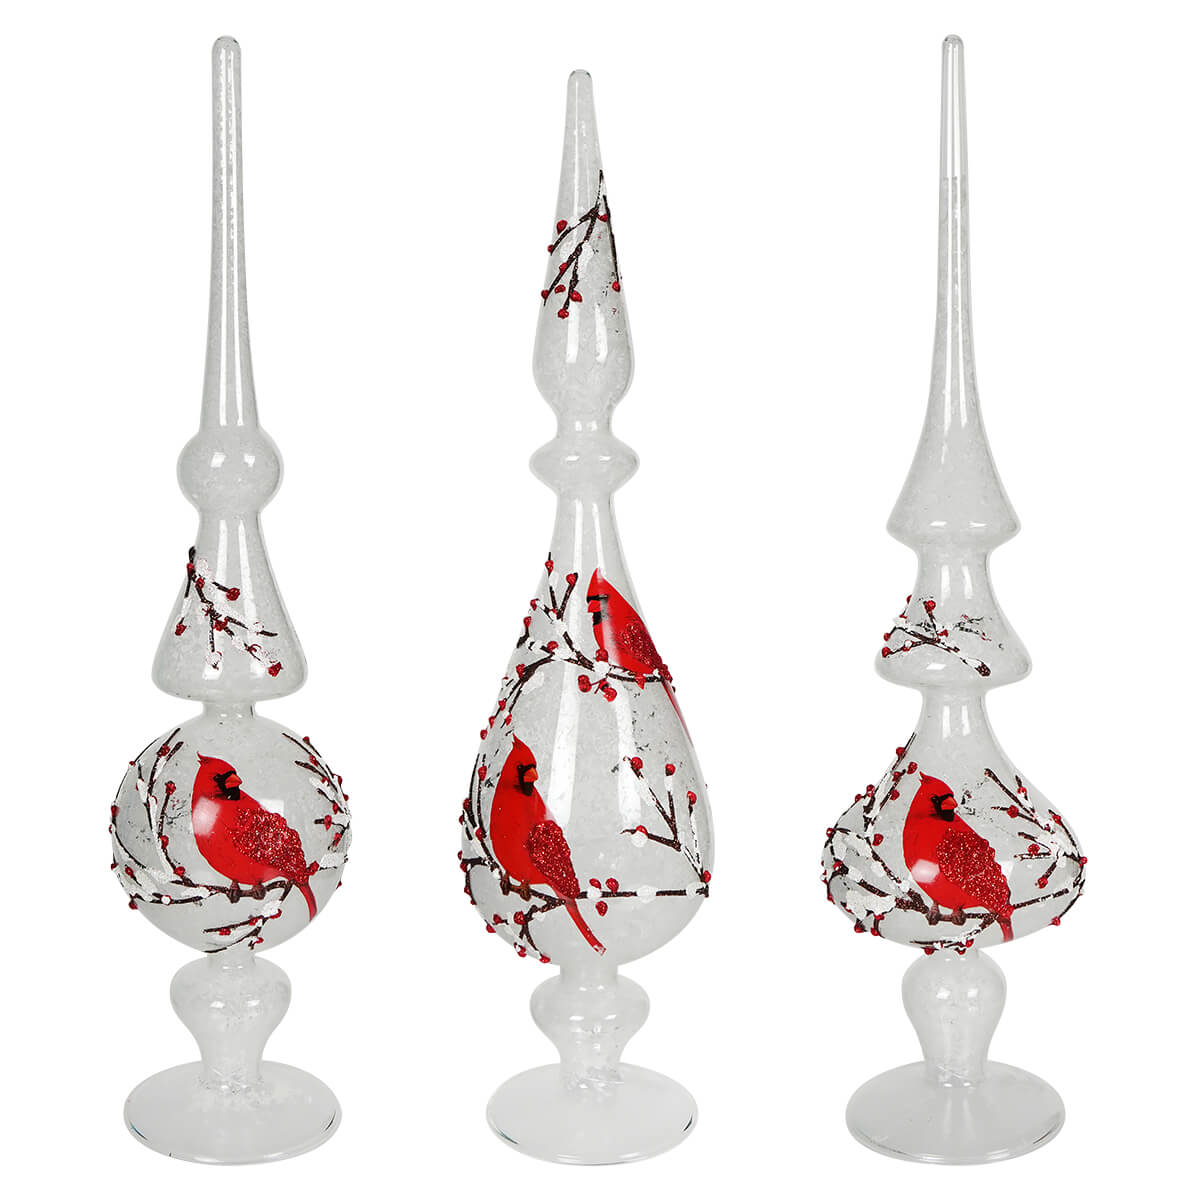 Snowy Tabletop Finials With Cardinals Set/3